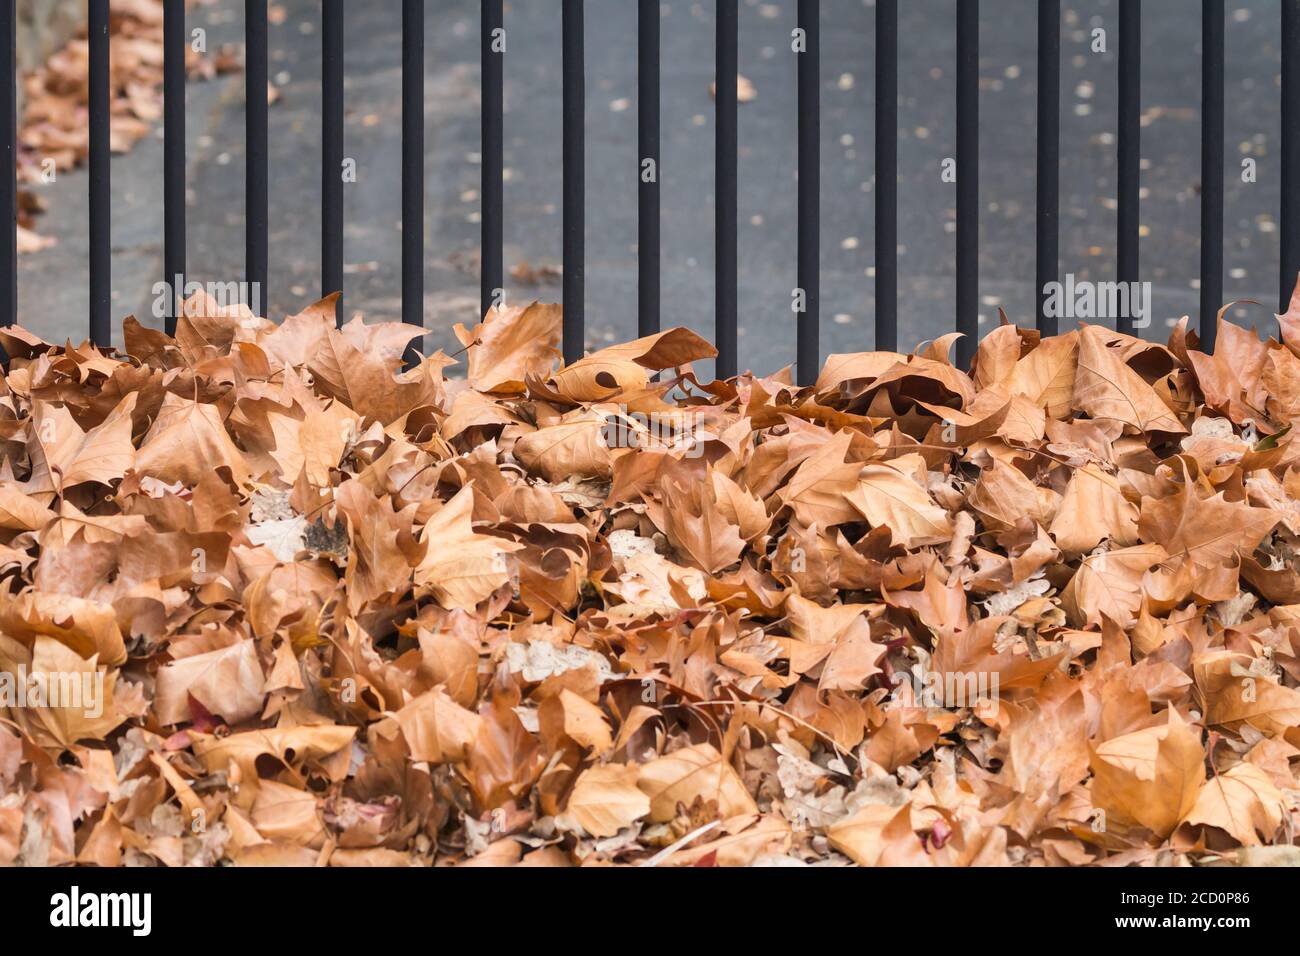 Oak leaves old and brown,close up, swept up against a metal fence during Autumn season concept weather, climate and seasons Stock Photo